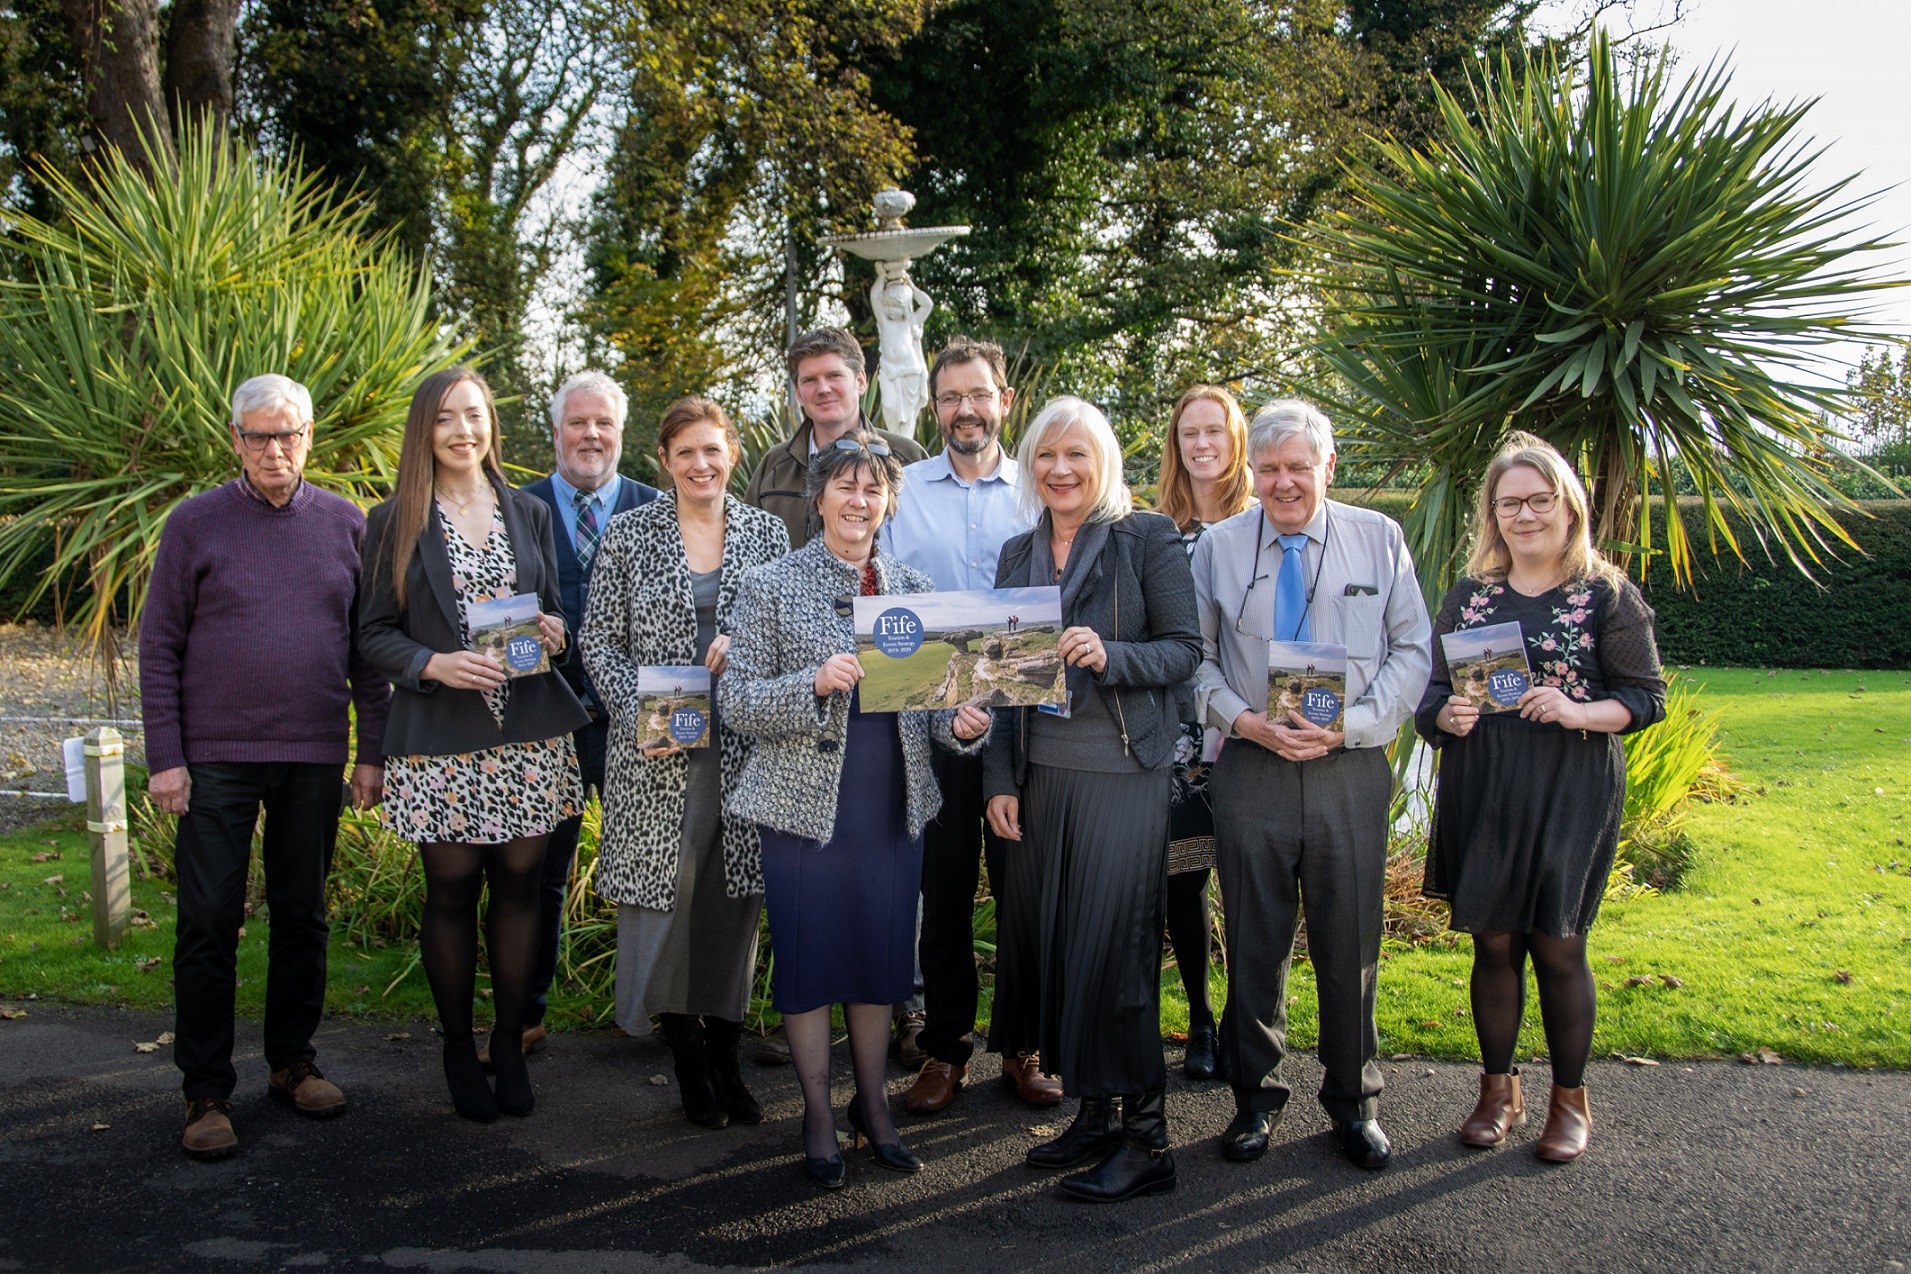 Pictured from left to right are Roger Brown, Joa Bell, Donald MacKenzie, Heather Stuart, Ed Heather-Hayes, Moira Henderson (Chair), Findlay Withers, Sandra Montador-Stewart, Caroline Warburton, John Kirkaldy, Ailsa Dempsey.